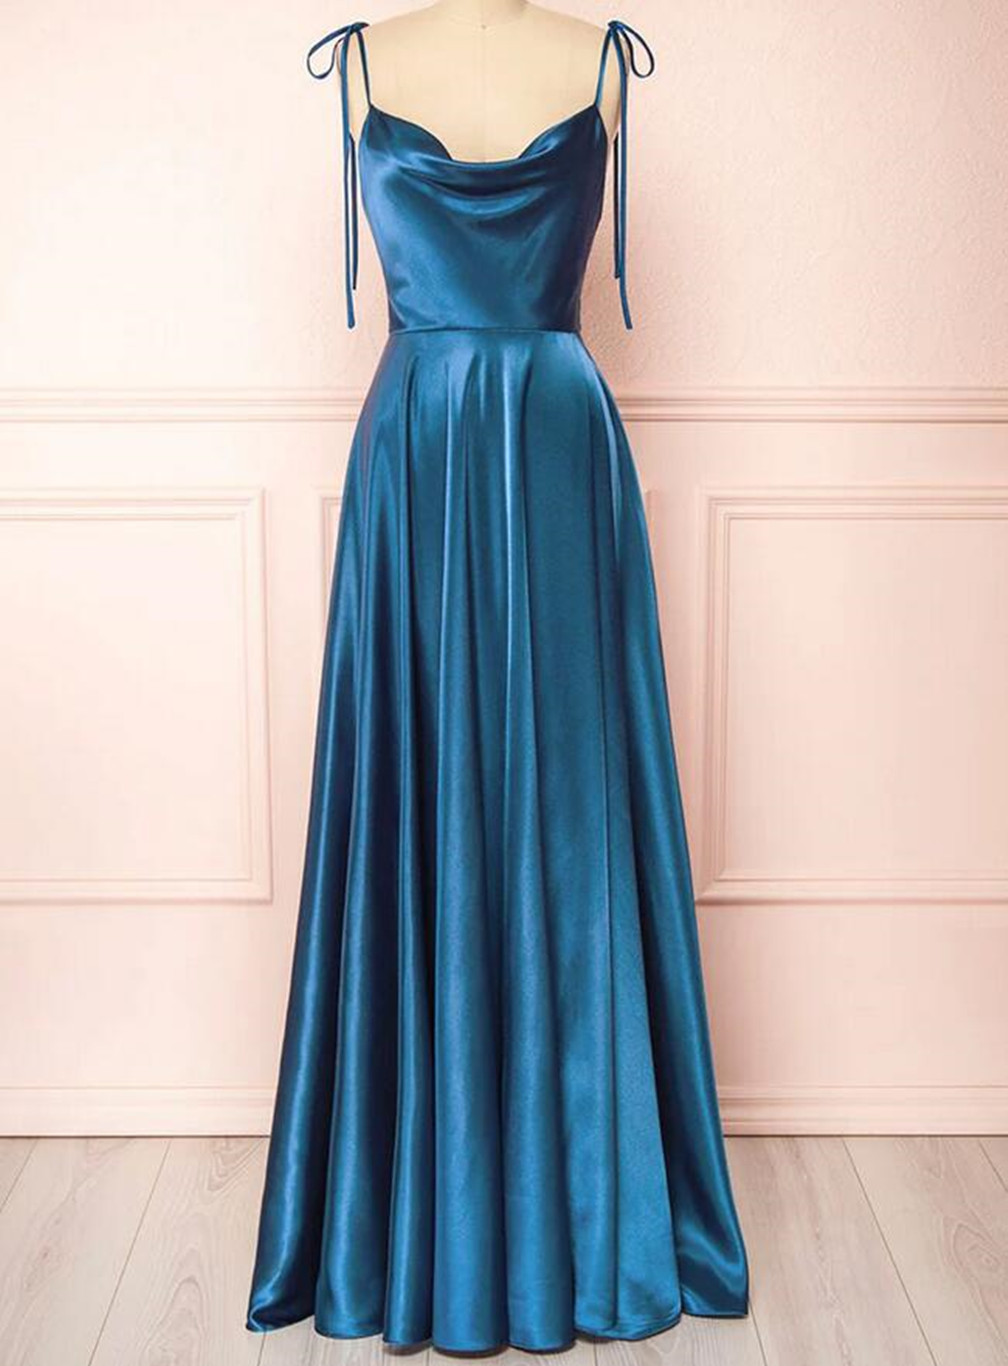 Women Satin Prom Dresses Long Spaghetti Strap Evening Party Gowns Sleeveless Formal Dress Yp065